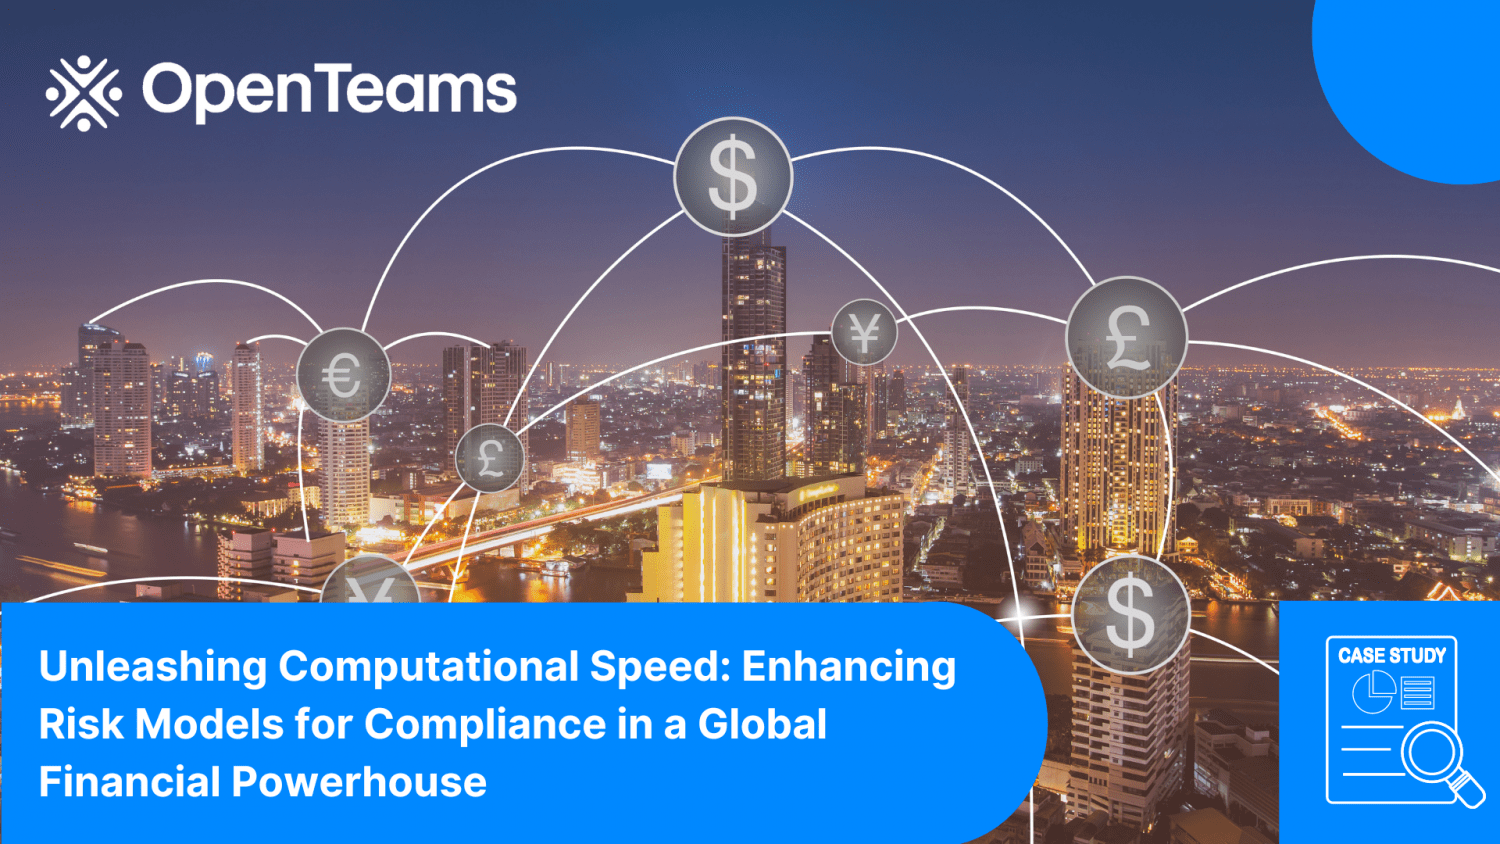 Unleashing Computational Speed: Enhancing Risk Models for Compliance in a Global Financial Powerhouse